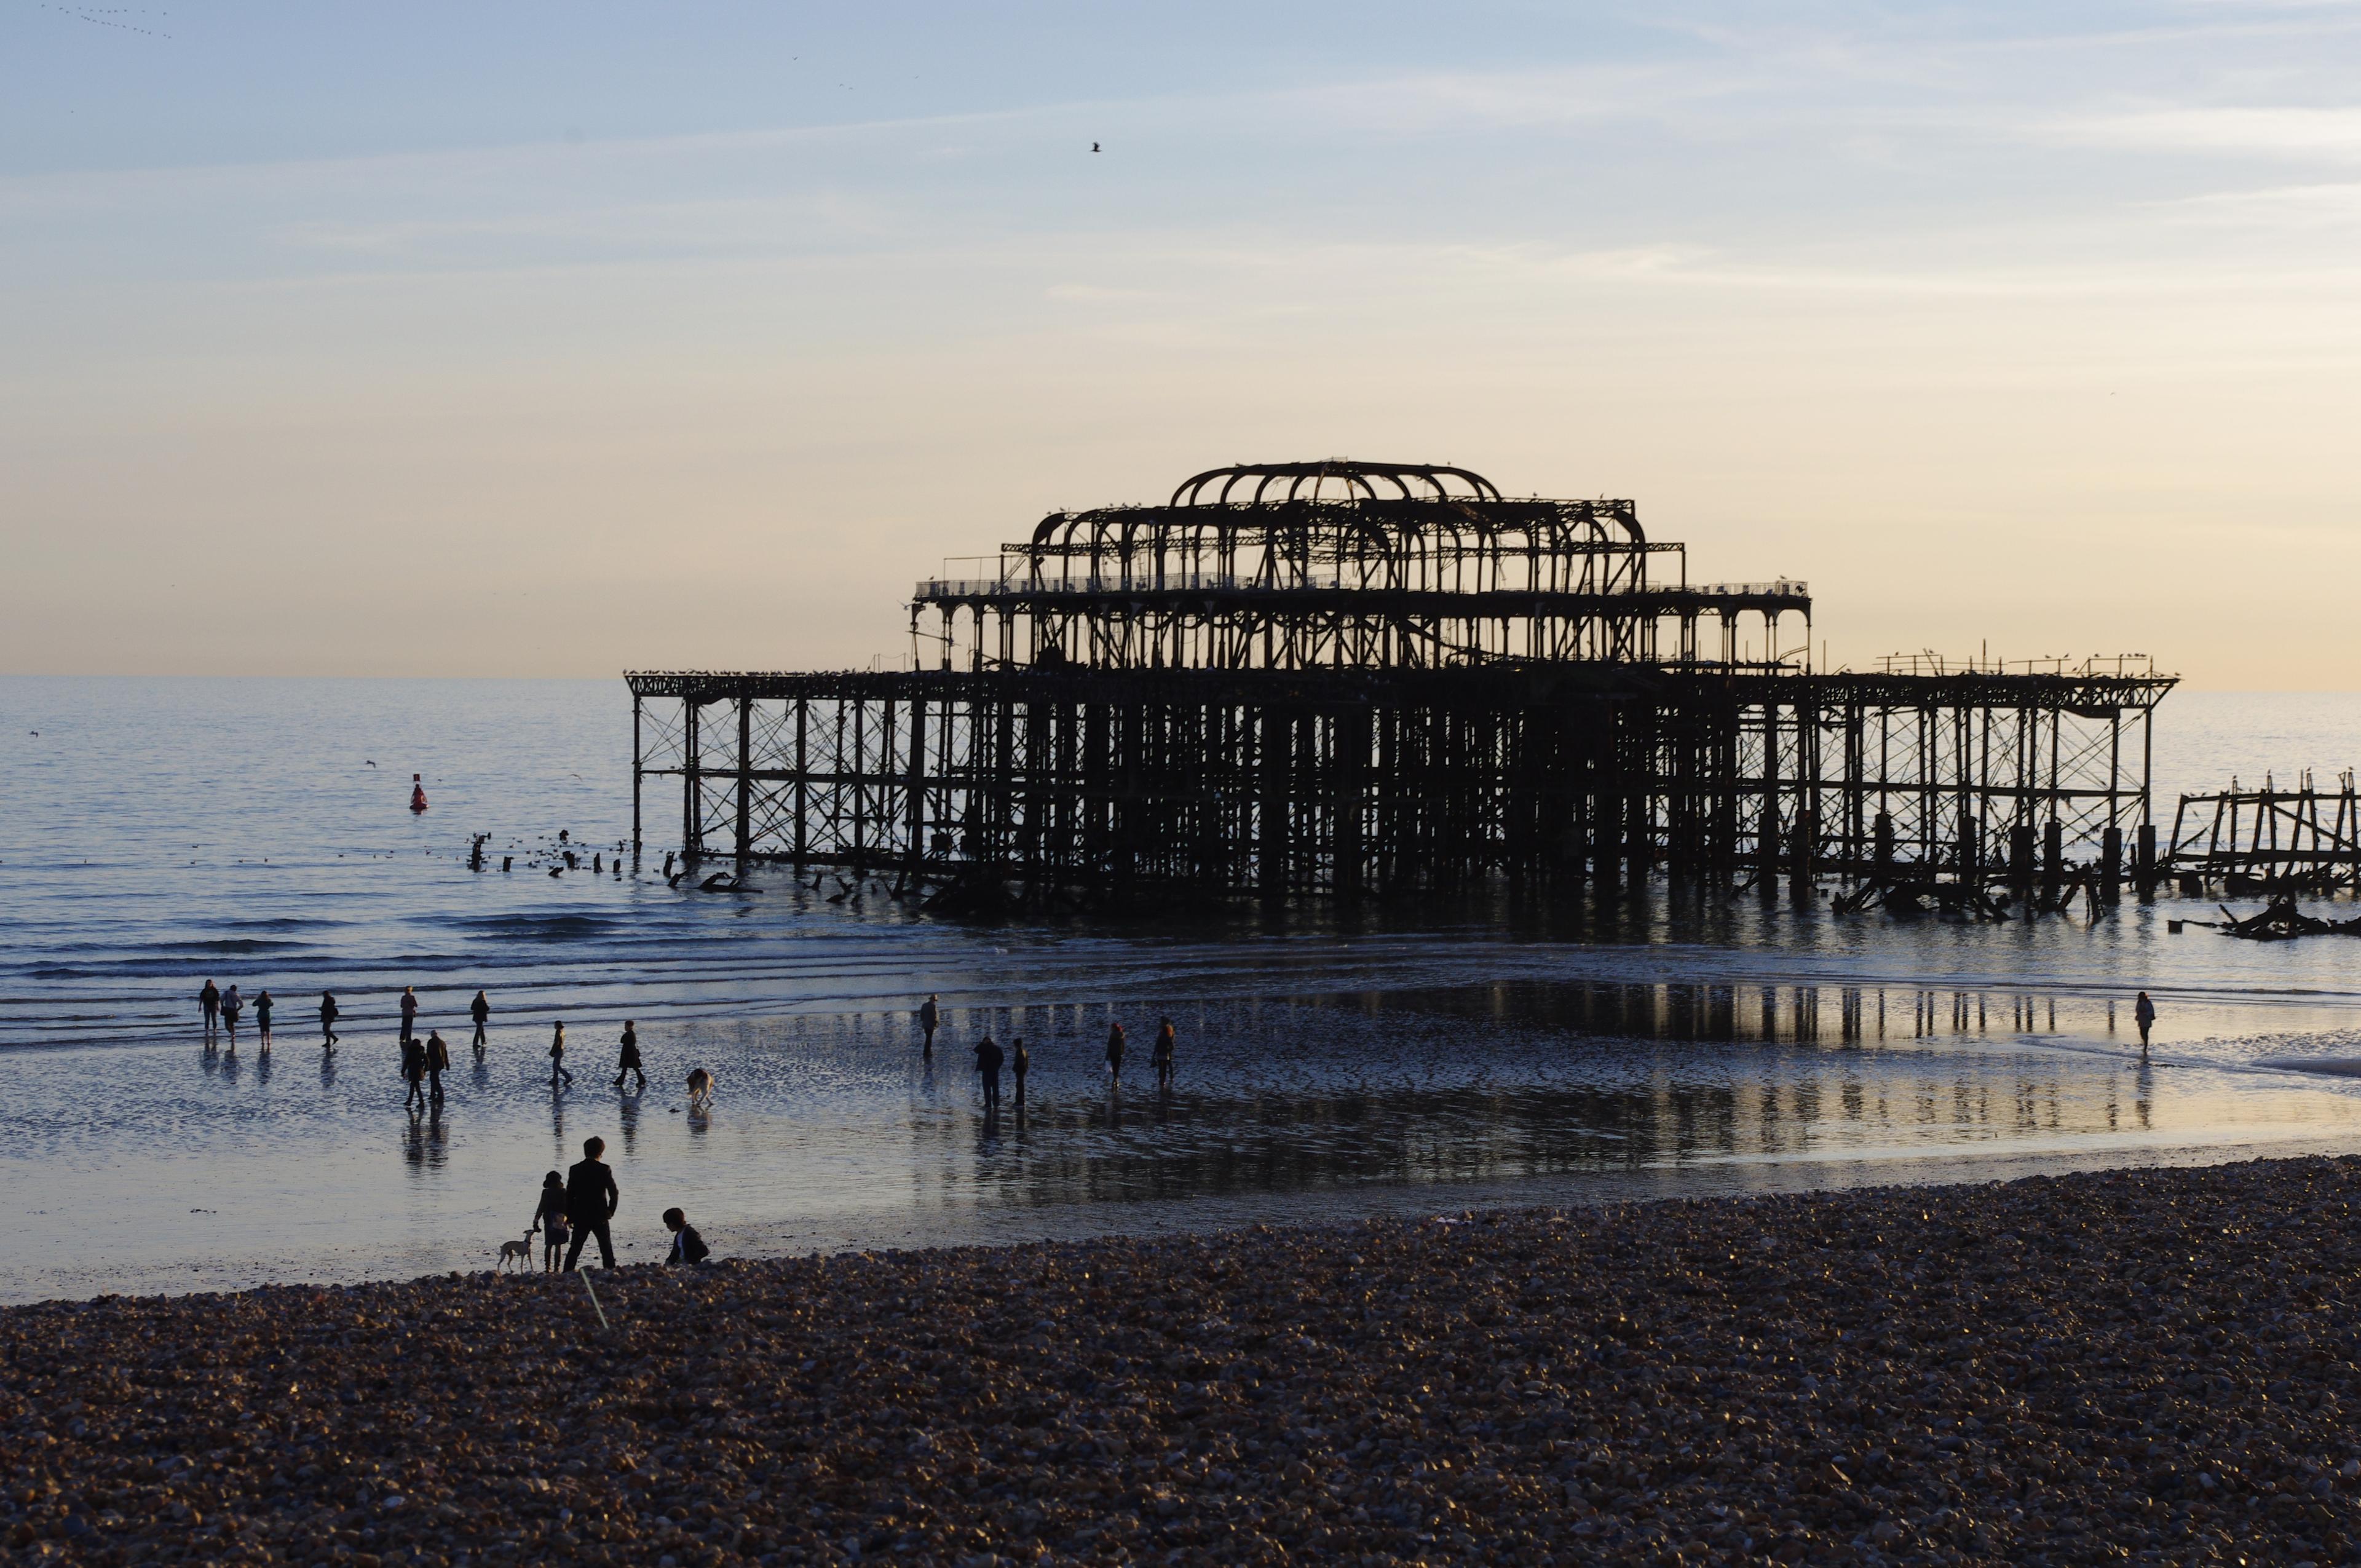 Cover image of this place West pier